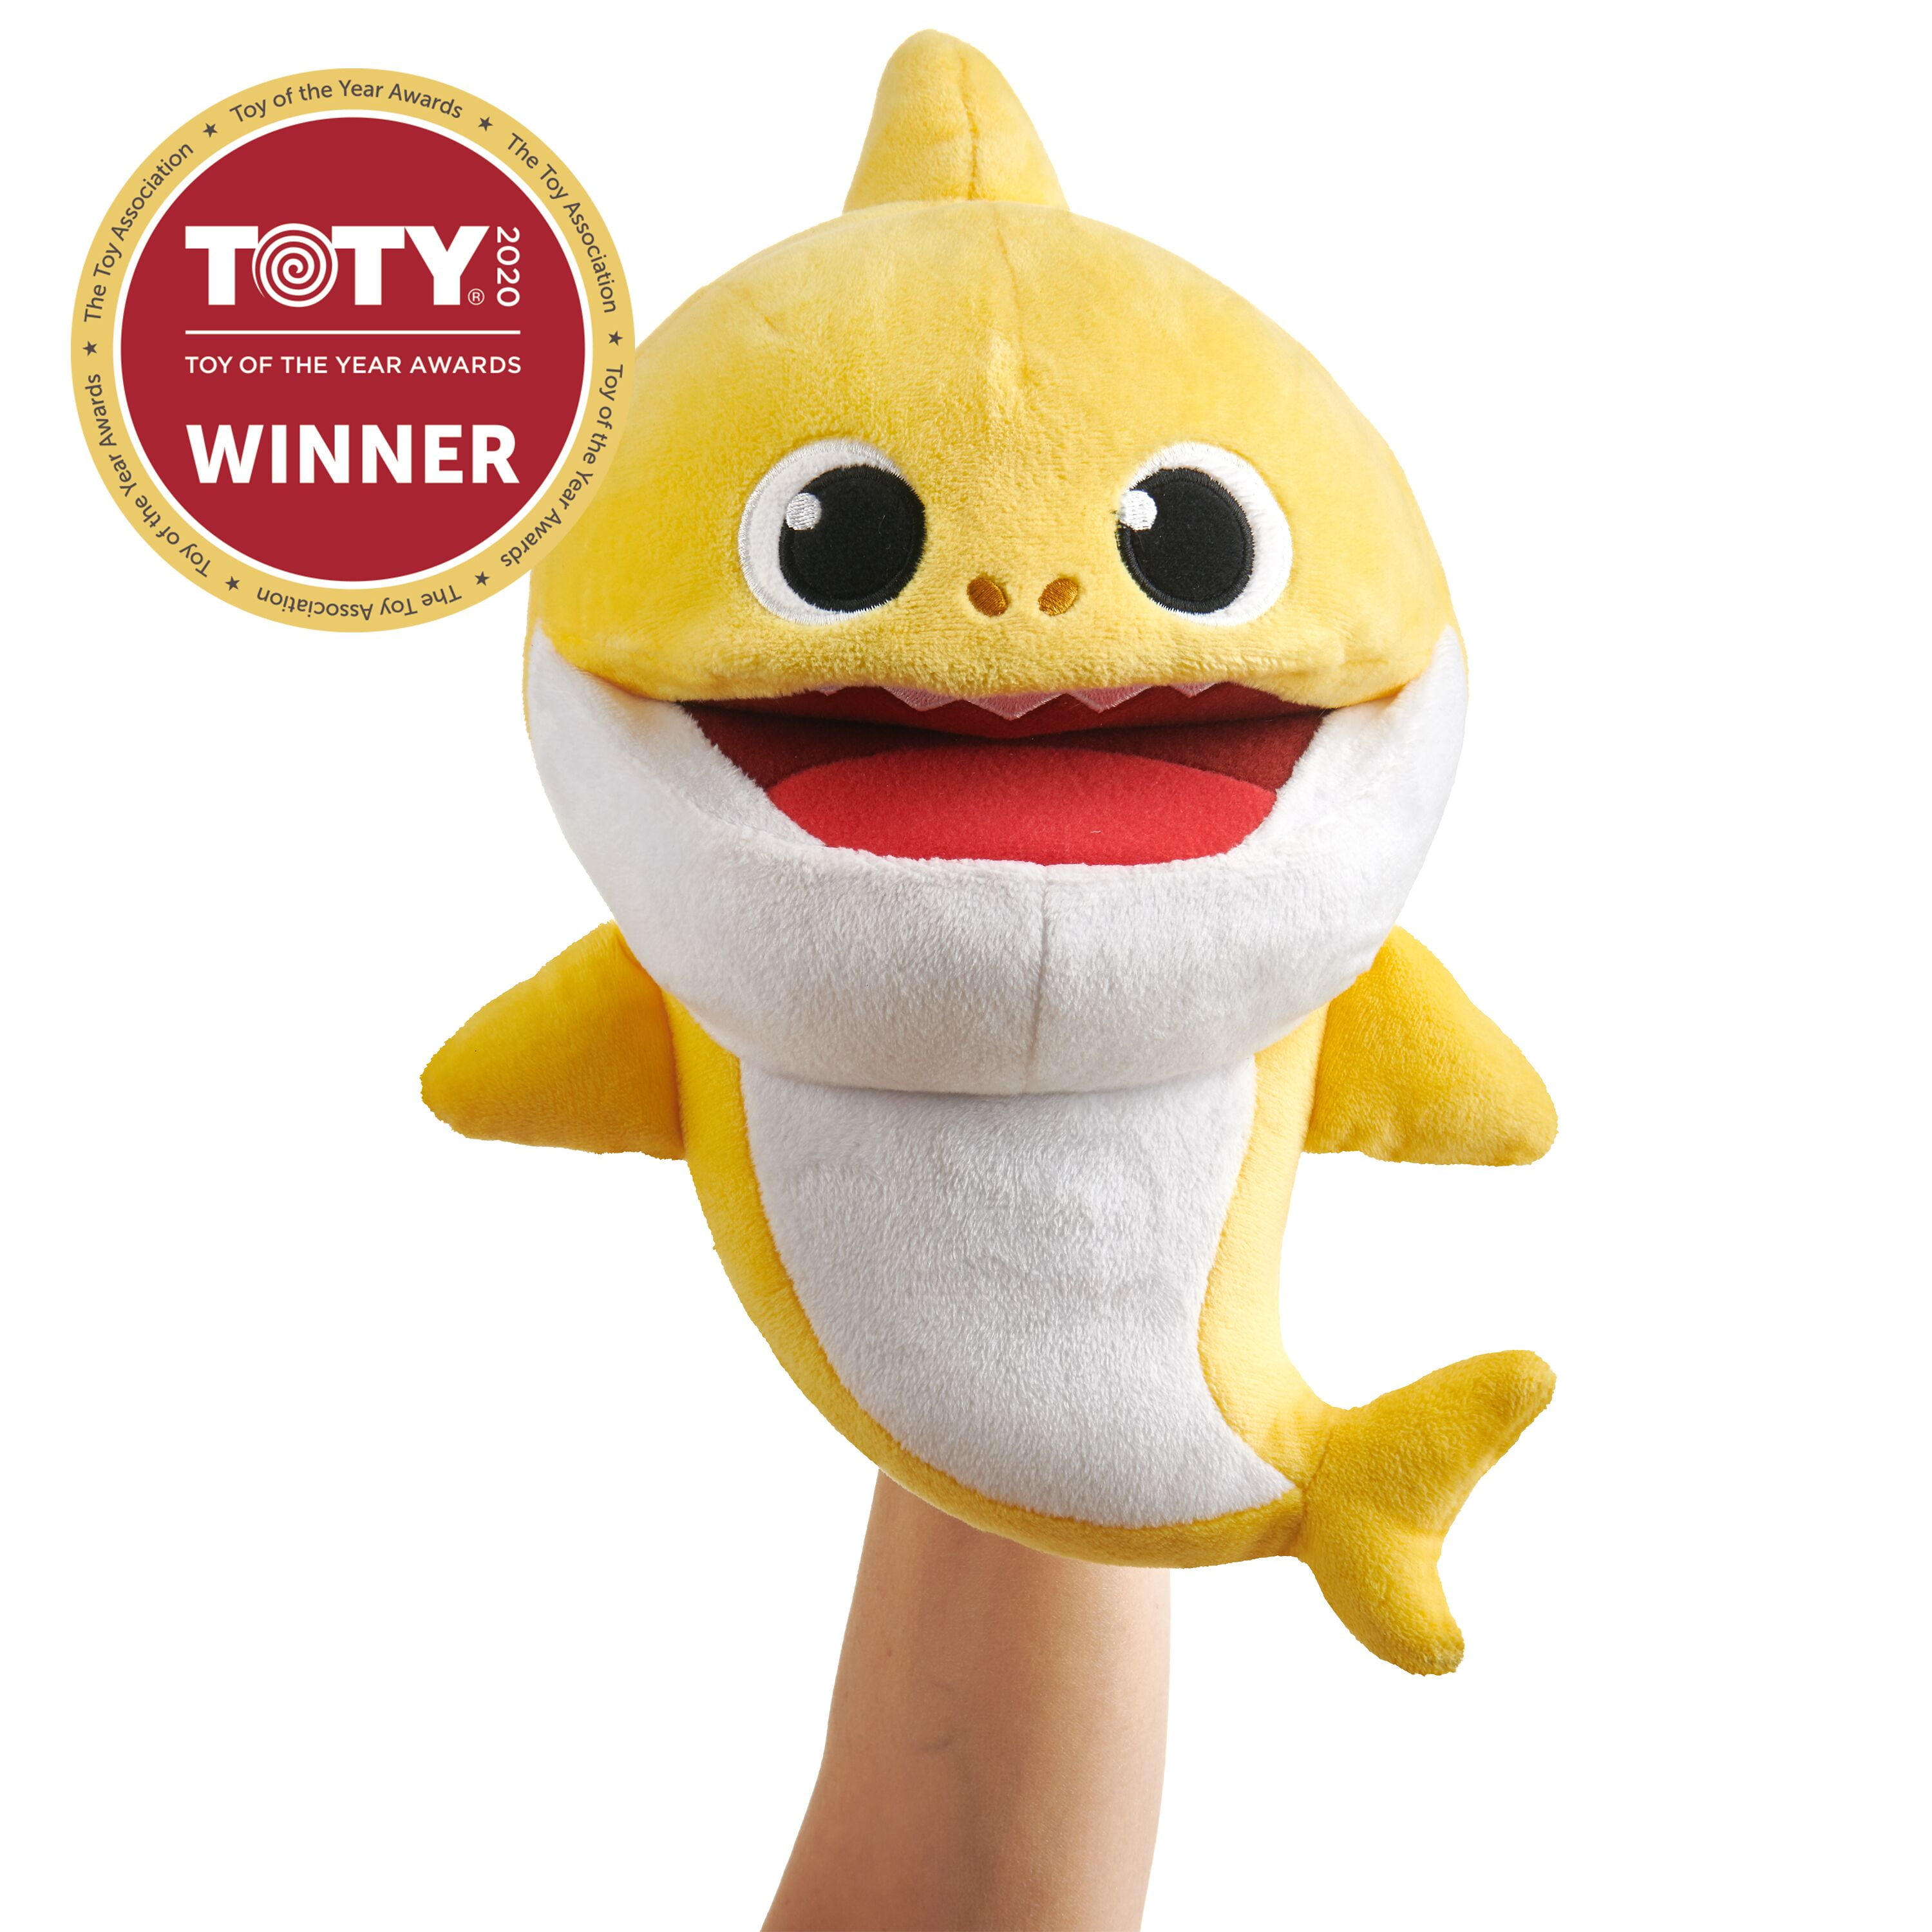 Baby Shark Puppets Mommy Daddy Baby Lot Of 3 Tempo Interactive Plush Toy 